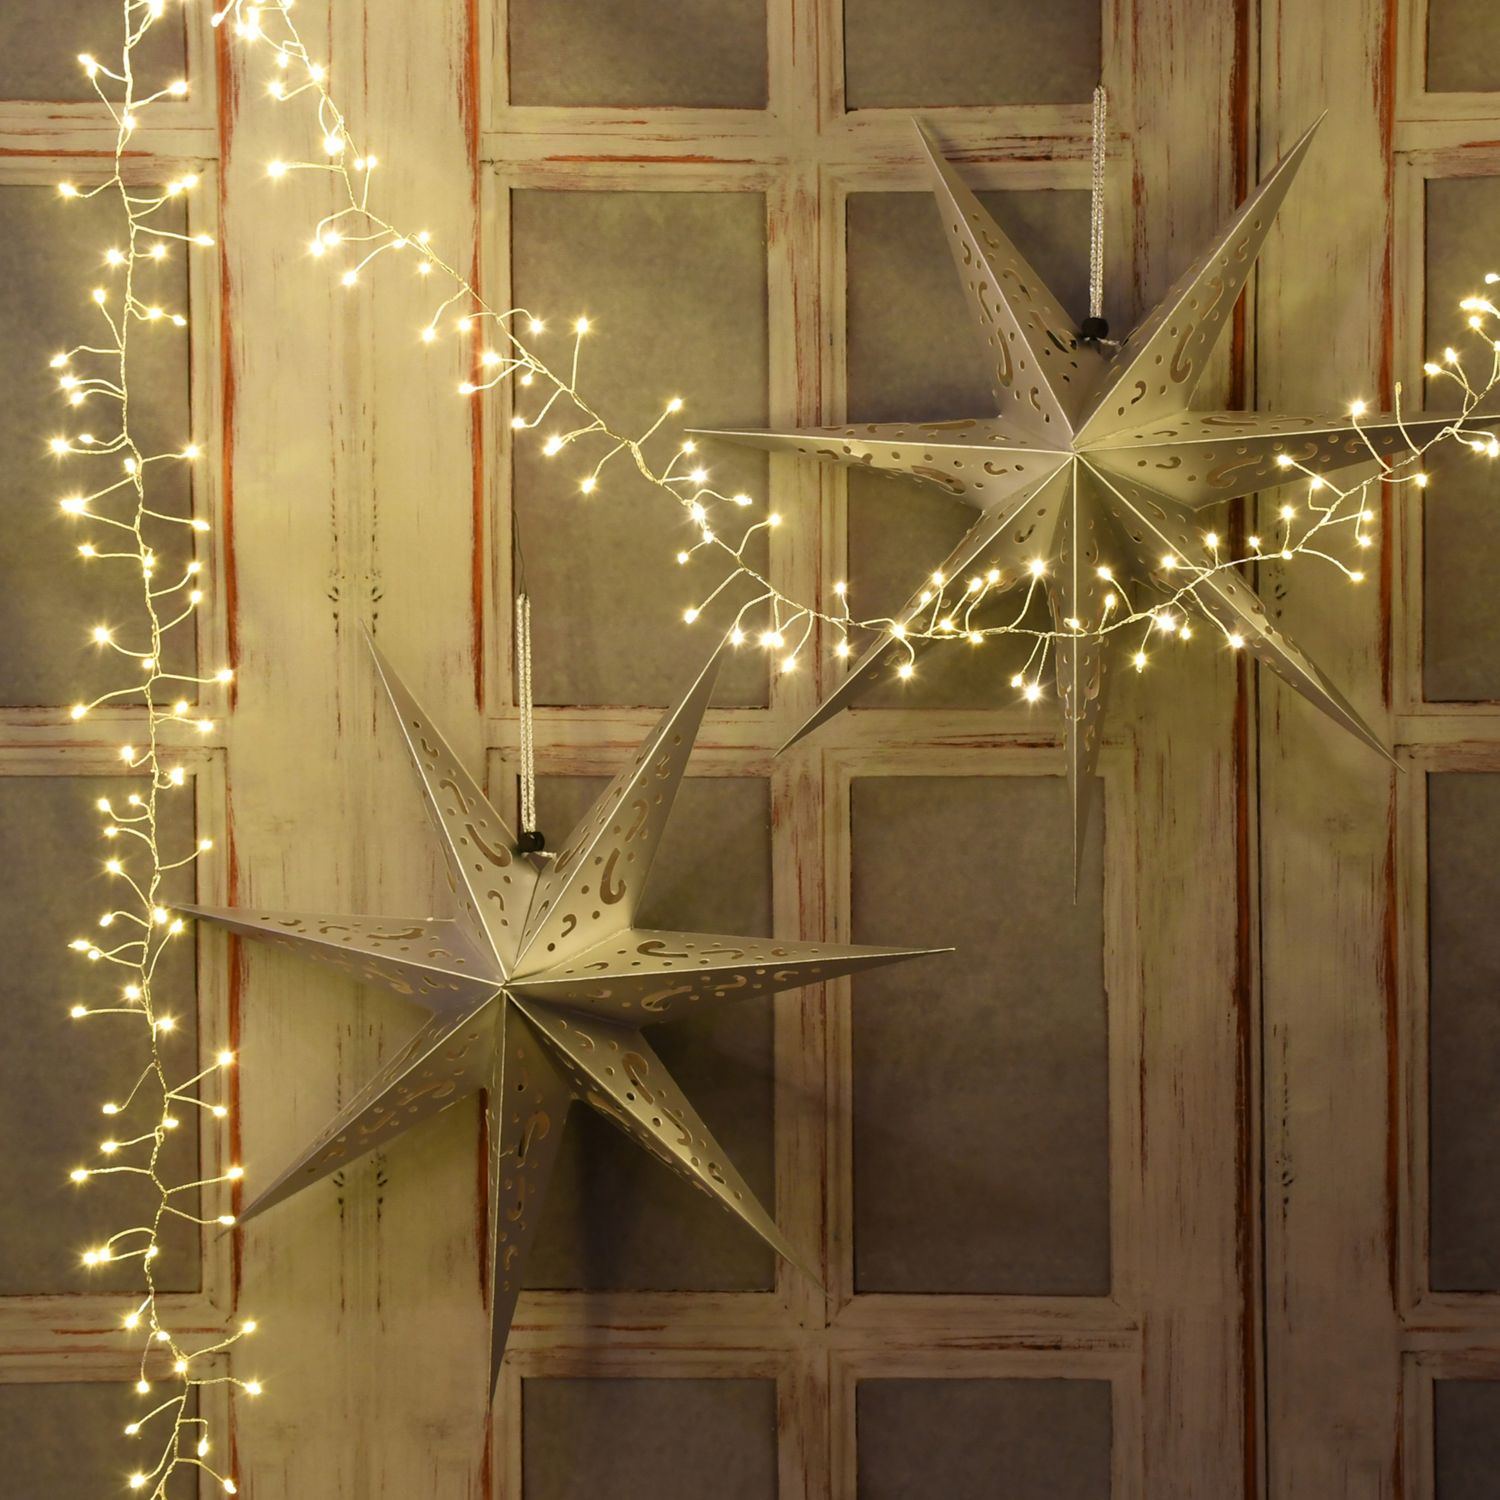 Brighten up any space in your home with string lights.